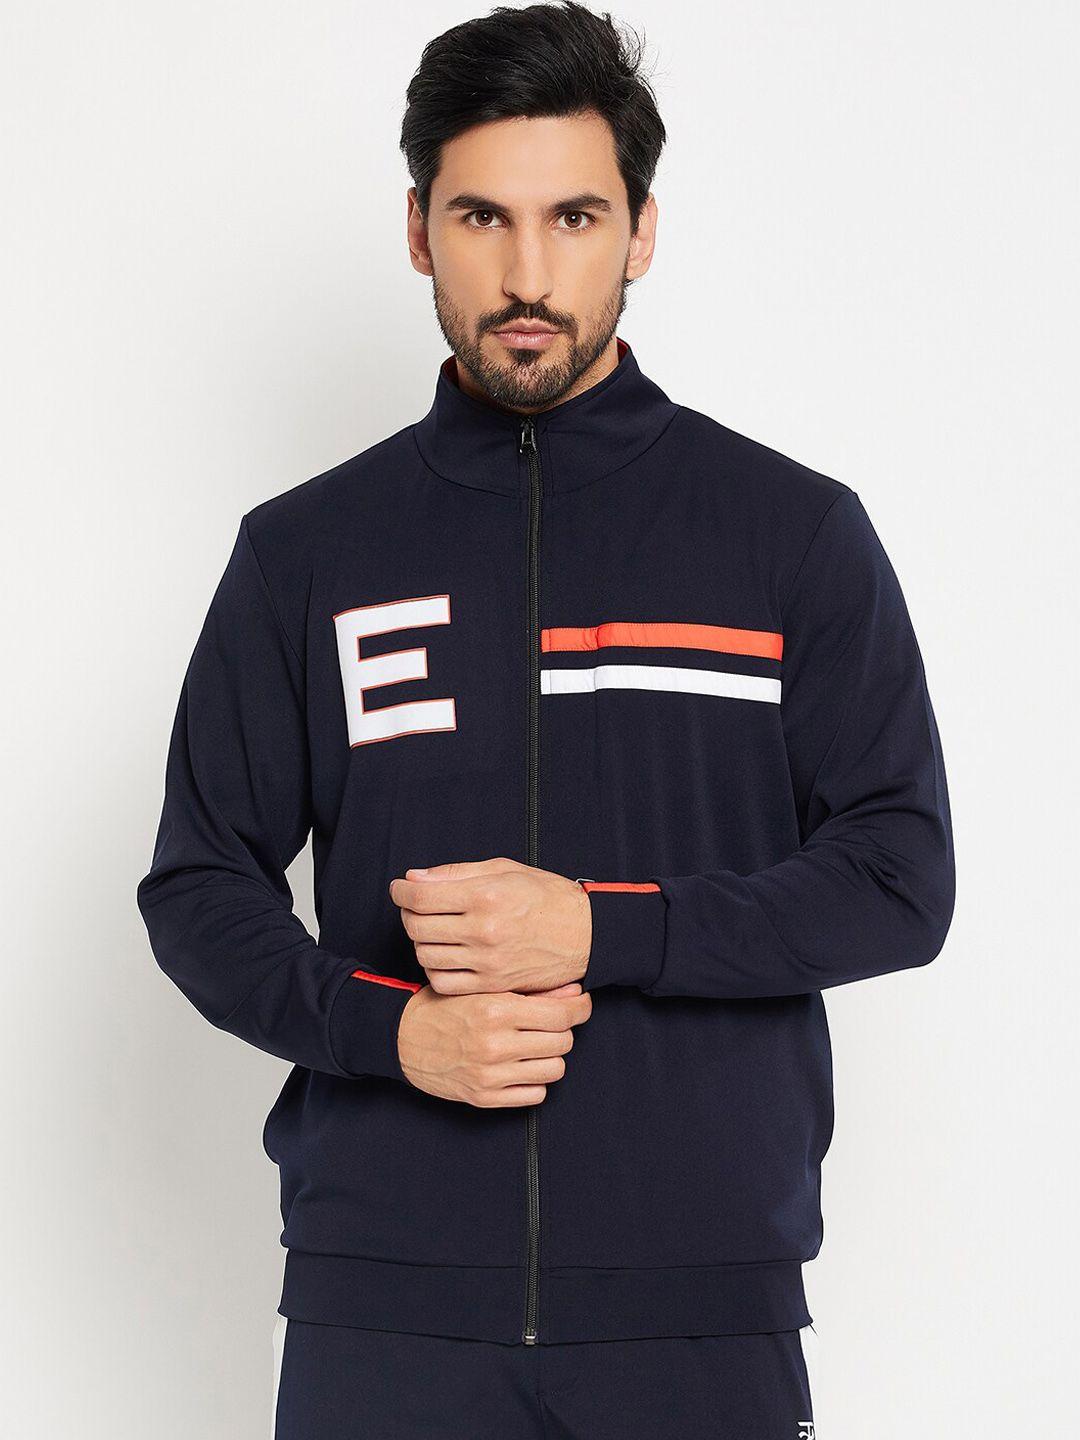 edrio typography printed stand collar sporty jacket